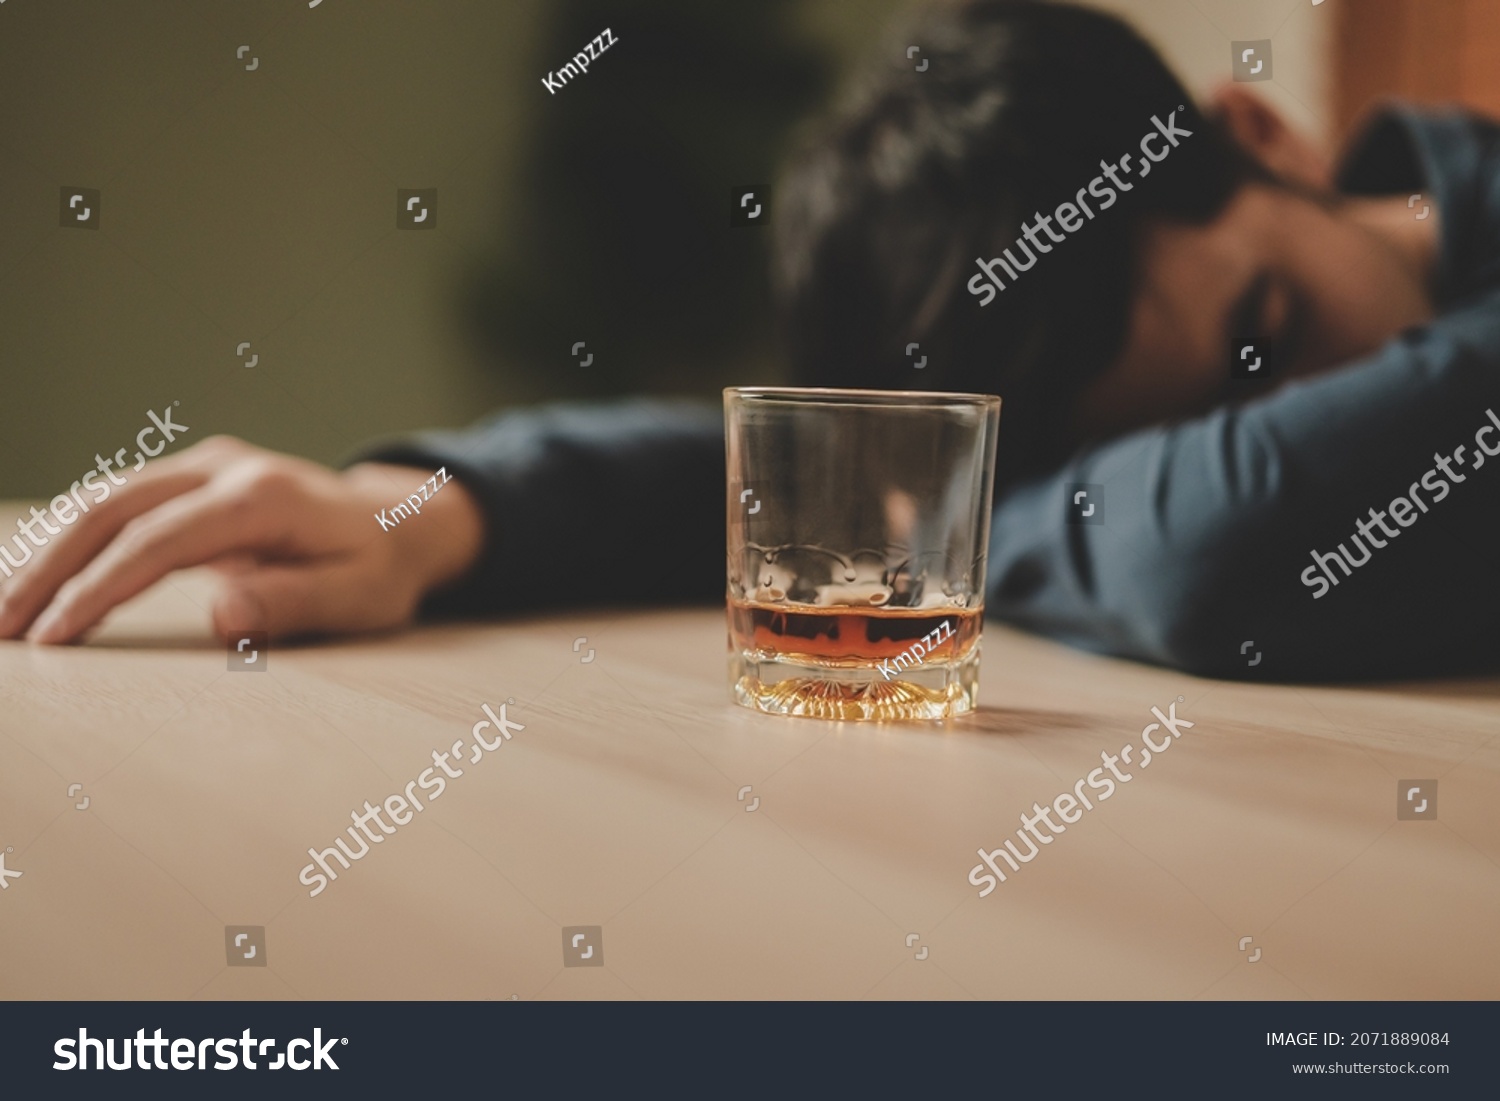 Alcoholism, depressed asian young man sleep on table while drinking alcoholic beverage, holding glass of whiskey alone at night. Treatment of alcohol addiction, suffer abuse problem alcoholism concept #2071889084